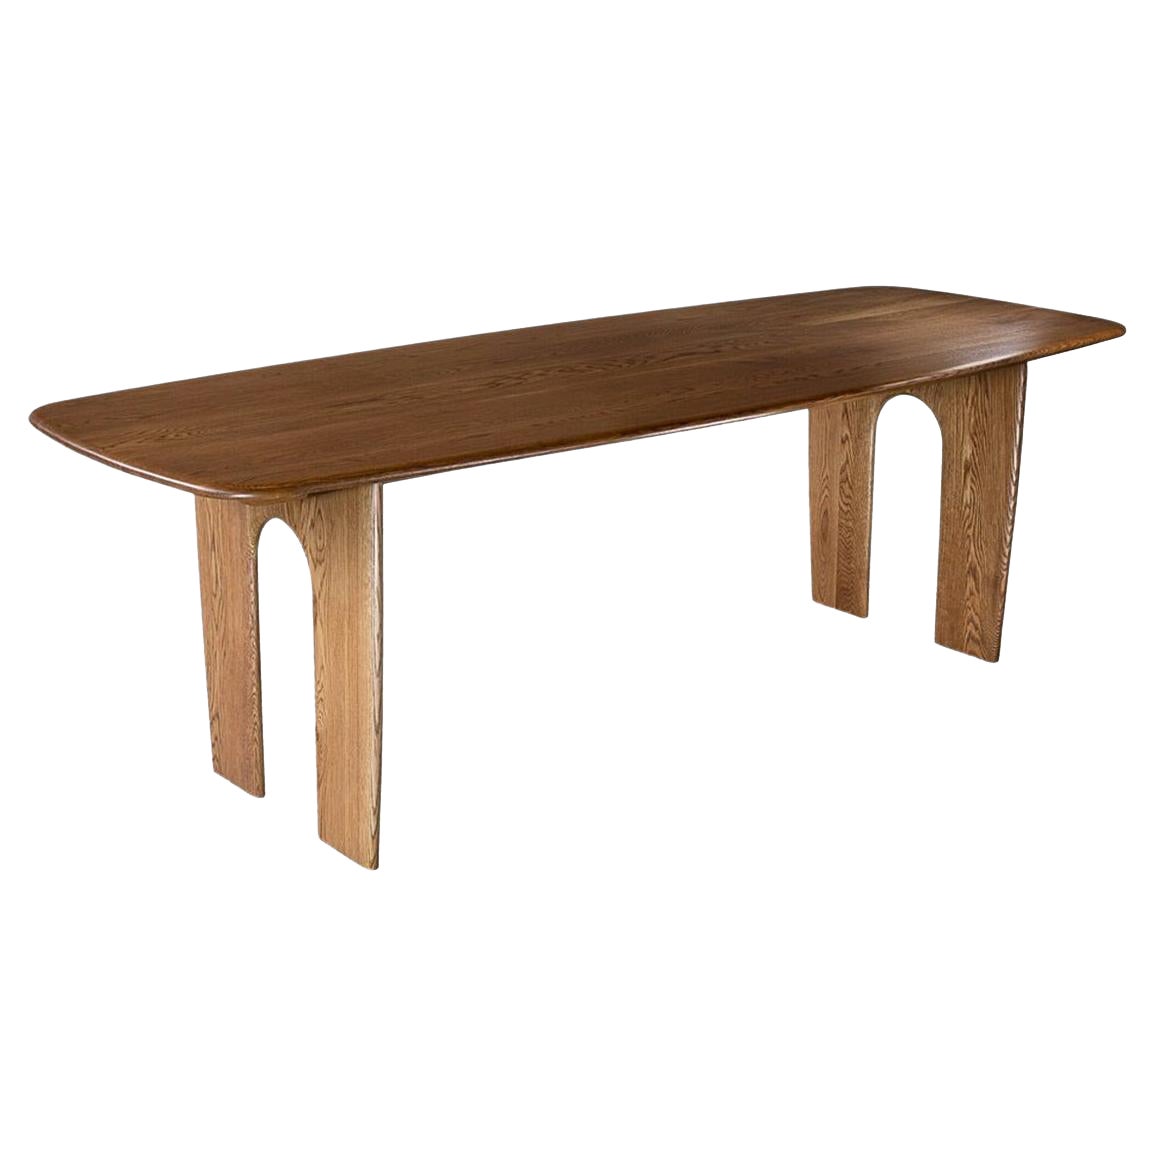 Coble Dining Table - Solid Oak - seats 4-6 For Sale